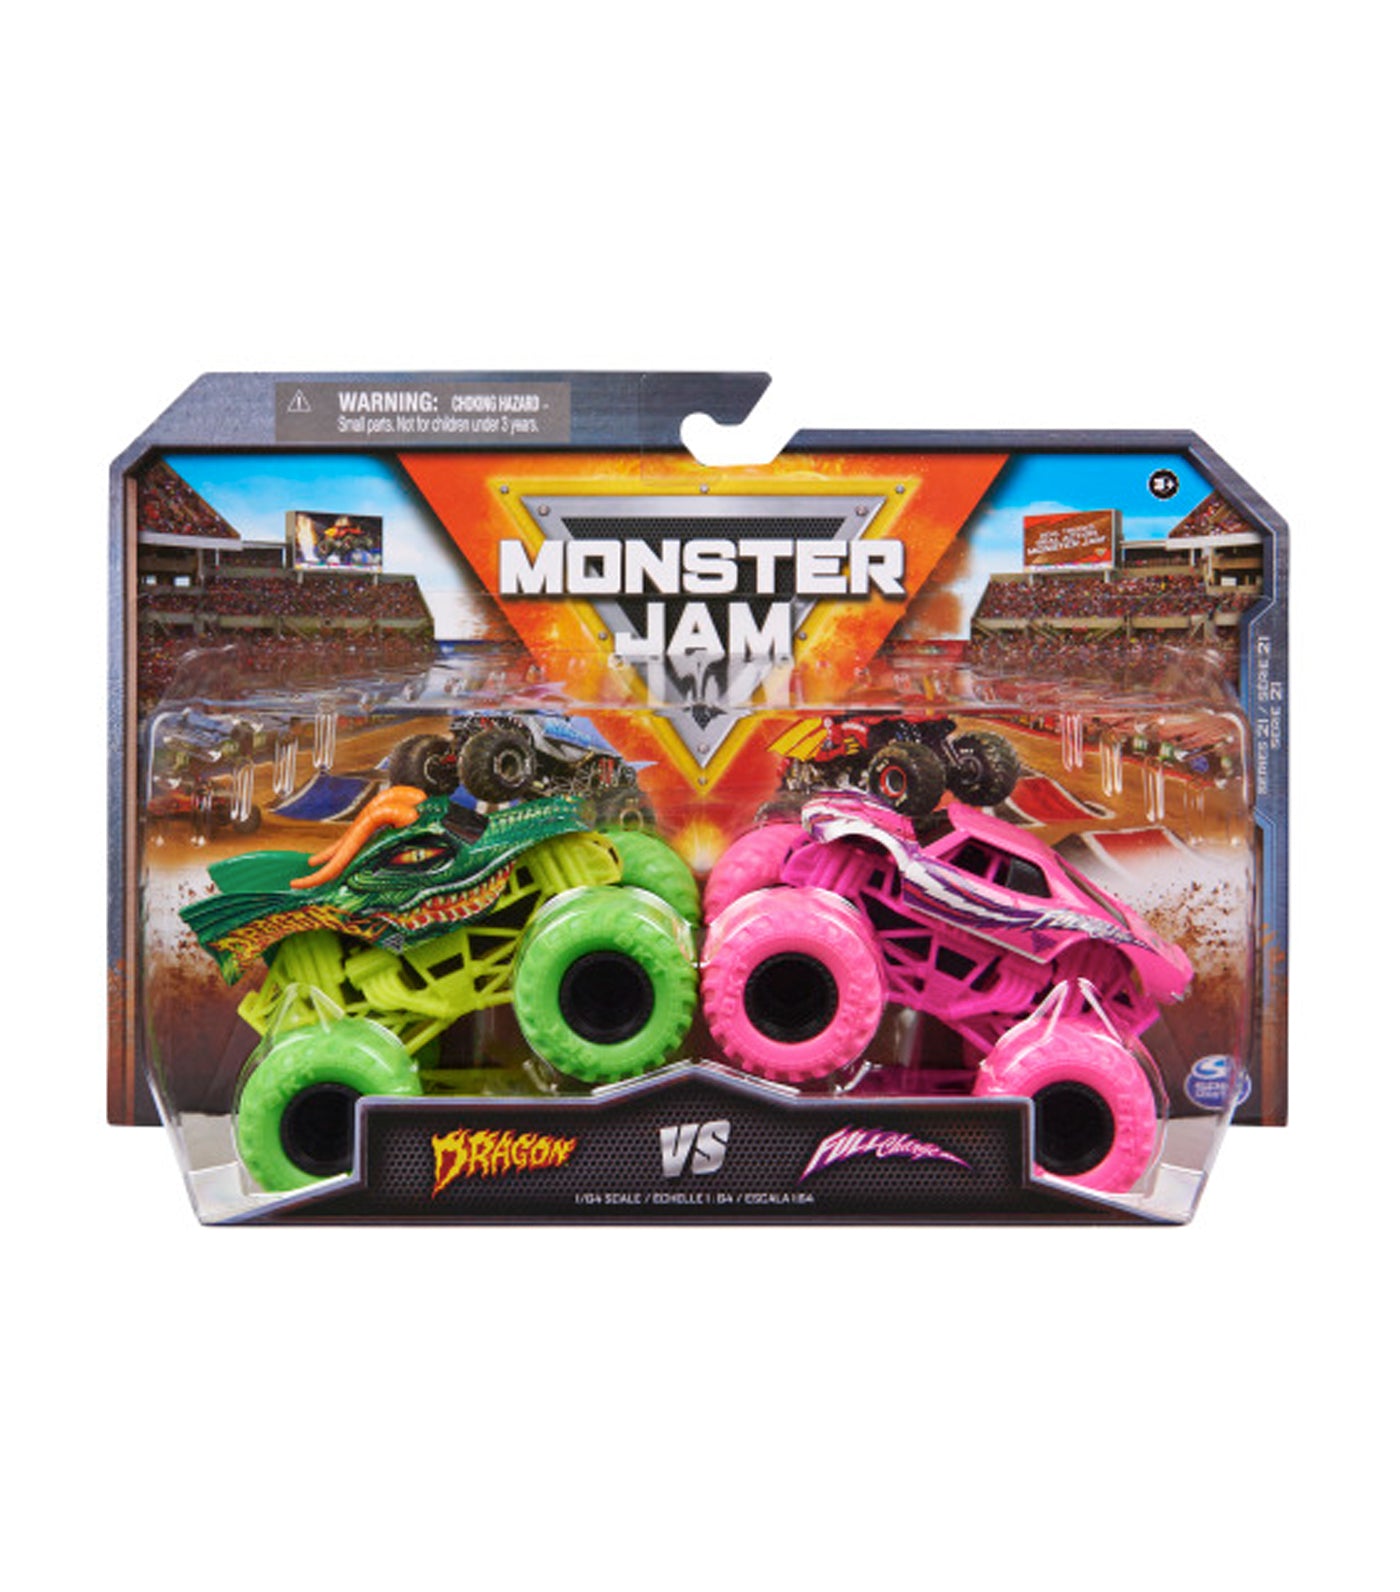 Diecast Dirty-to-Clean Monster Truck Set - Dragon VS Full Charge Neon